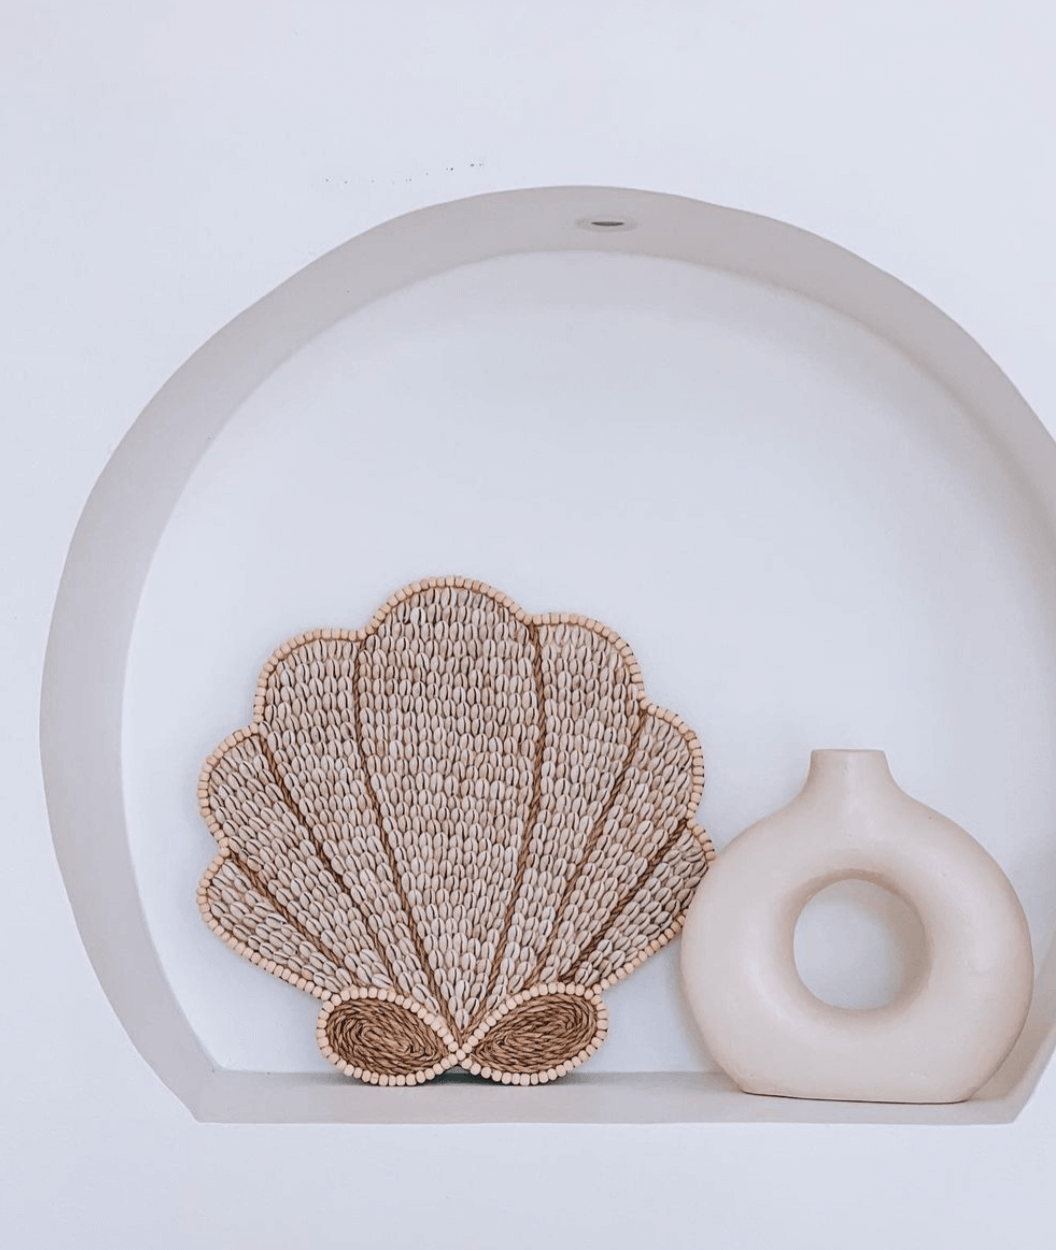 WALL DECORATION WITH BEACH SHELLS